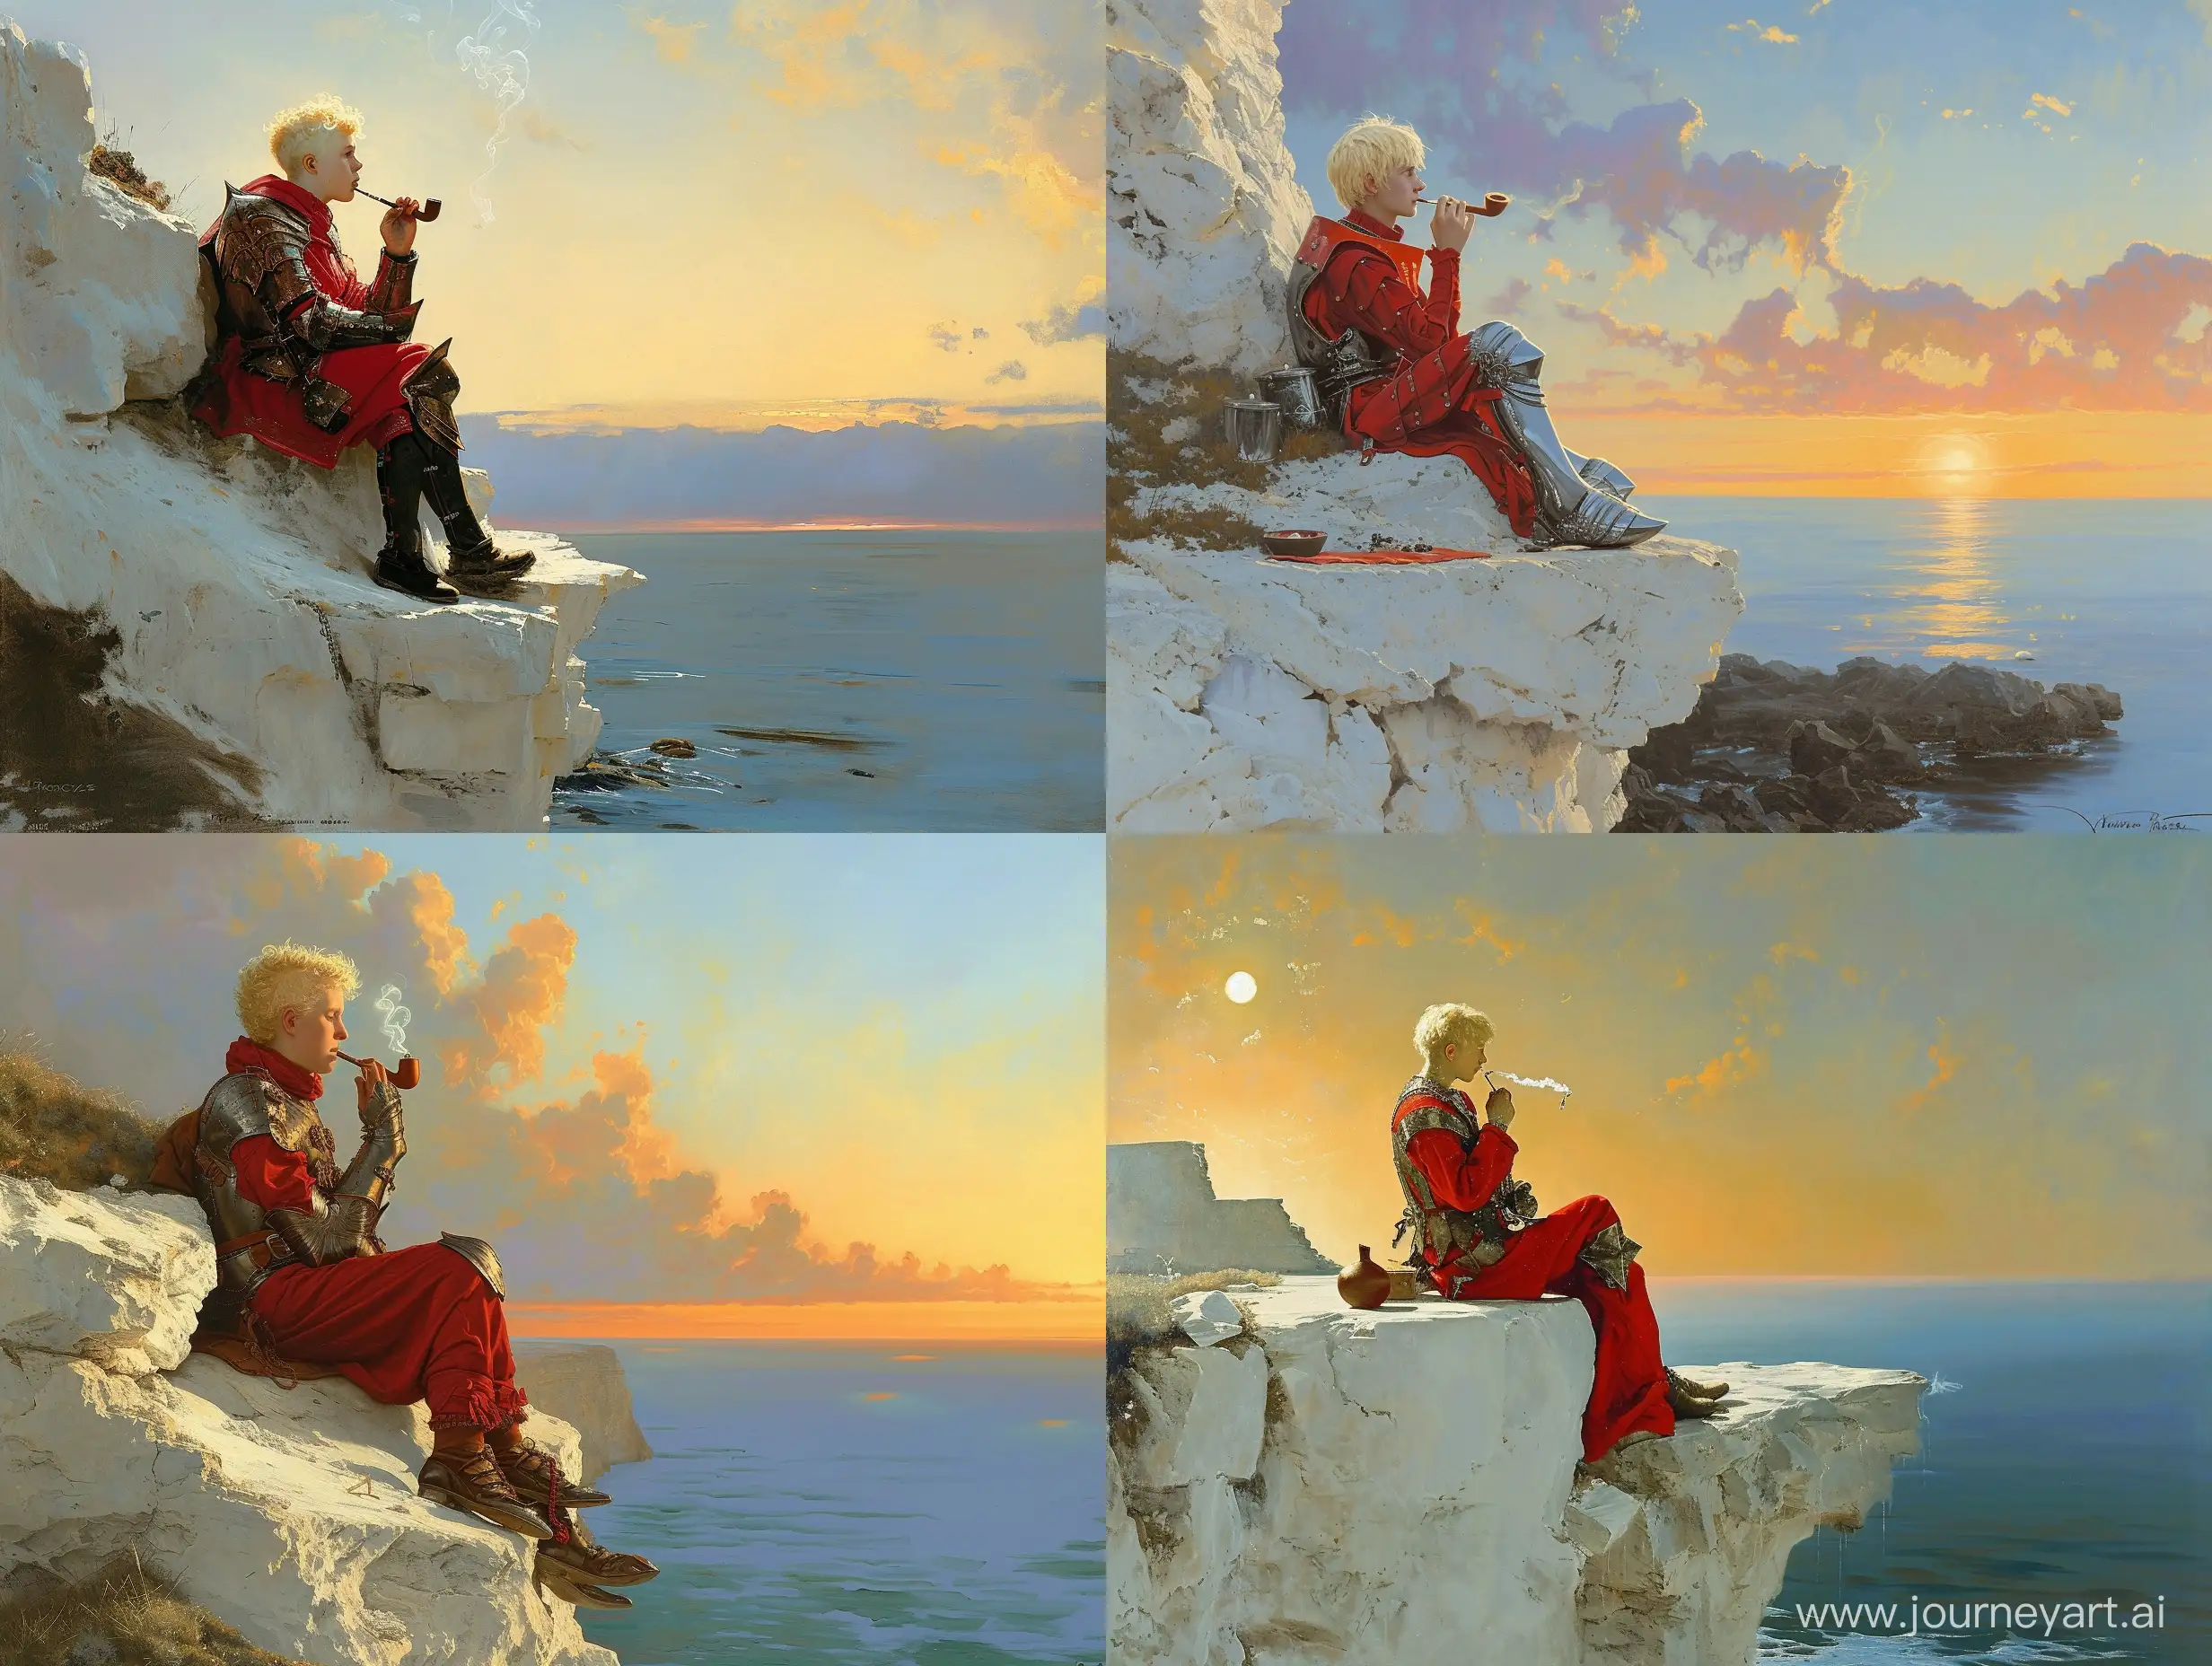 Blonde-Knight-Contemplating-at-Sunset-Cliff